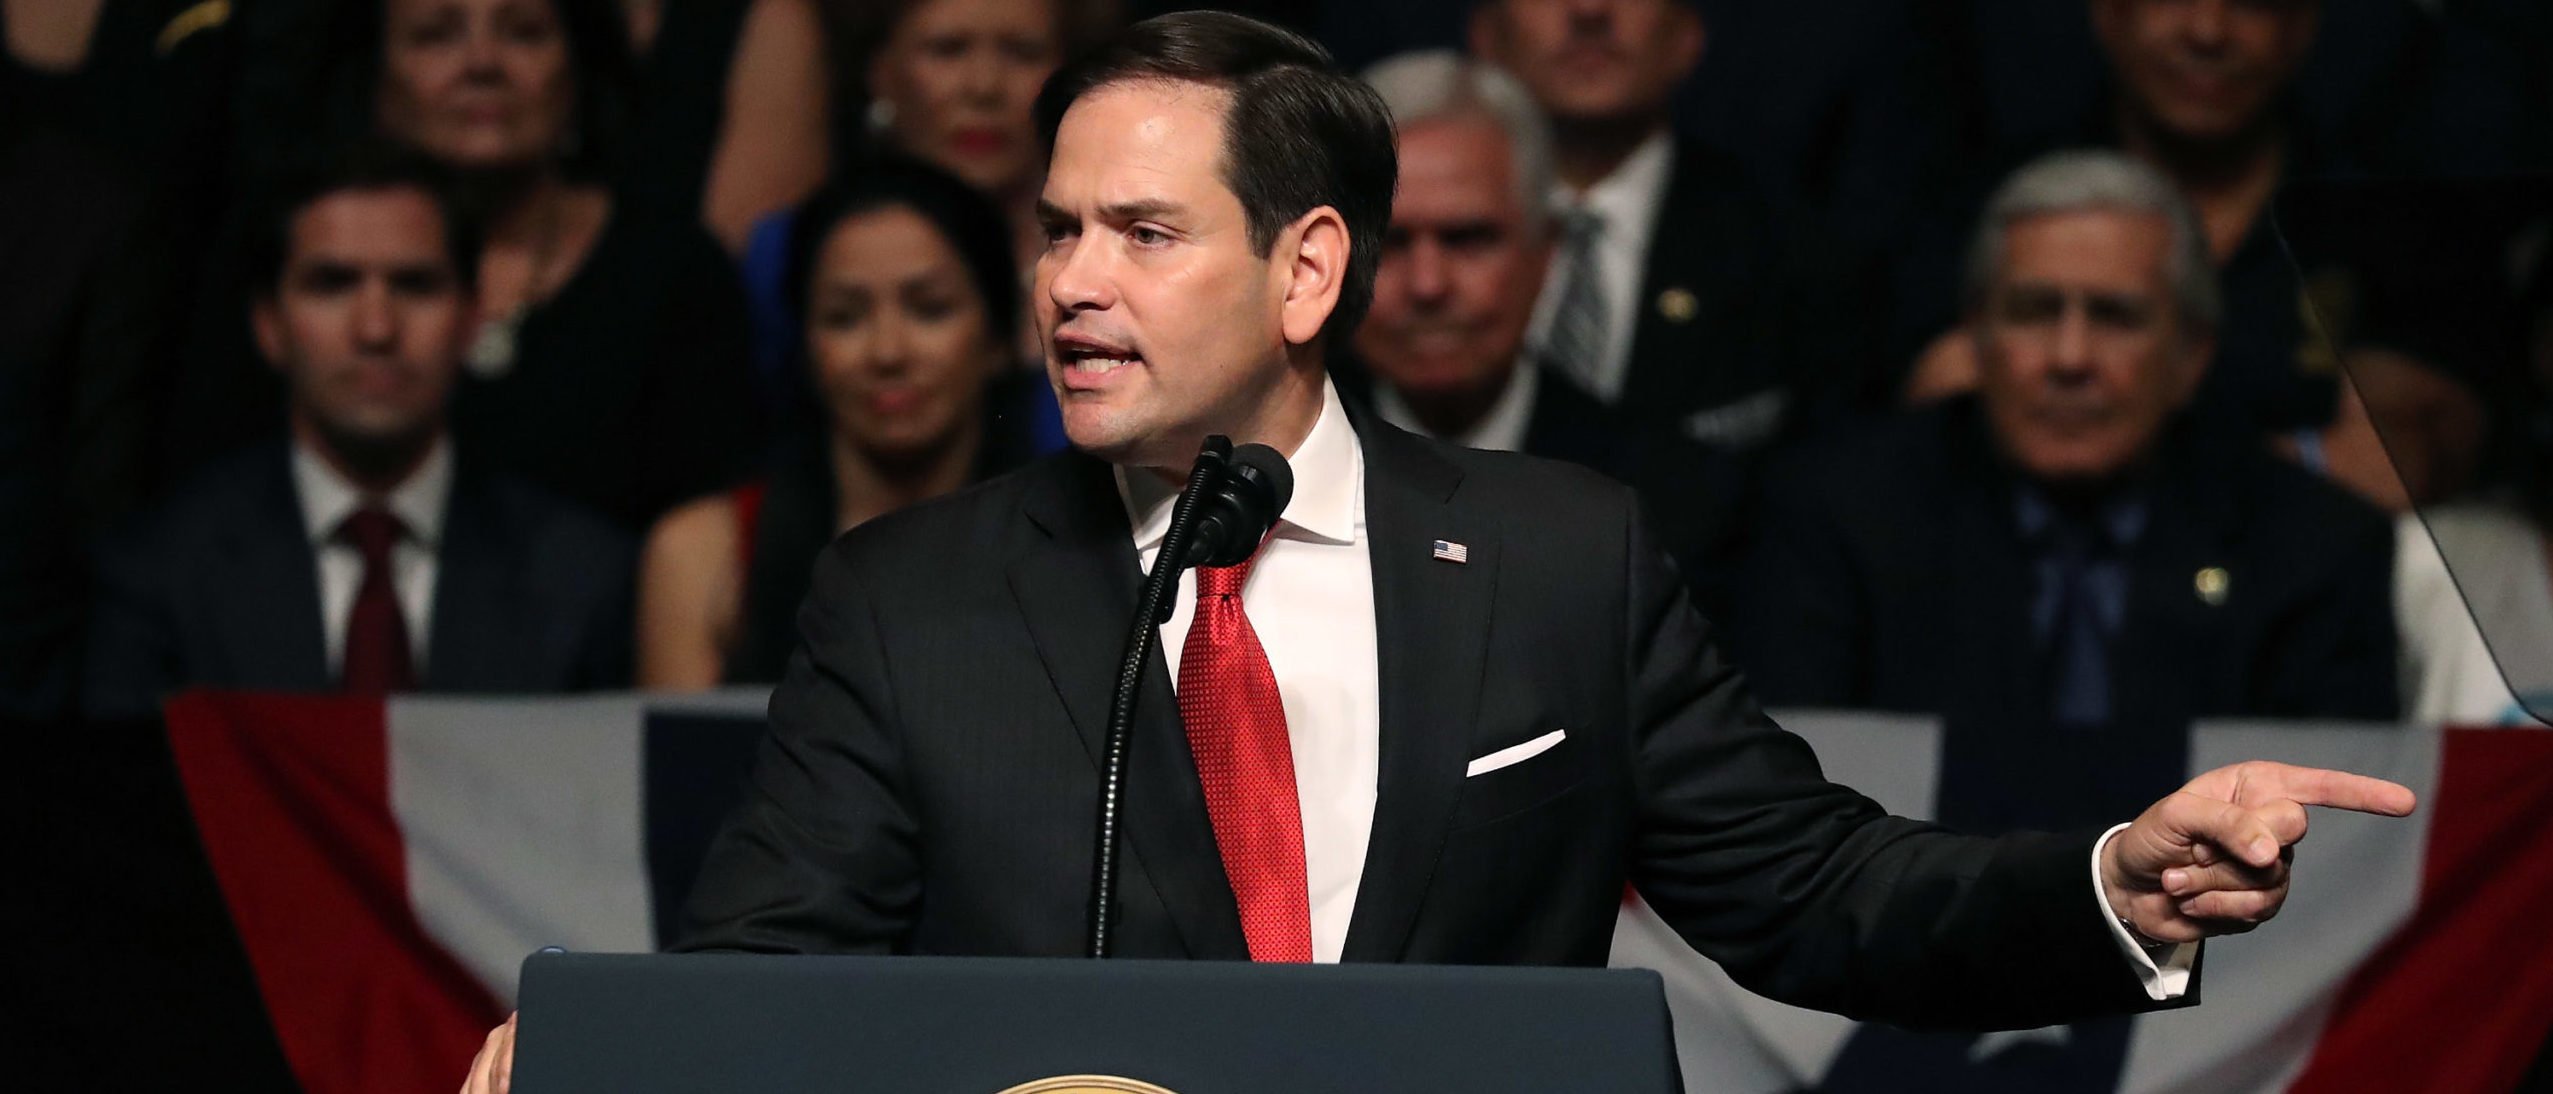 MIAMI, FL - JUNE 16: U.S. Sen. Marco Rubio (R-FL) speaks ahead of President Donald Trump announcing policy changes he is making toward Cuba at the Manuel Artime Theater in the Little Havana neighborhood on June 16, 2017 in Miami, Florida. The President will re-institute some of the restrictions on travel to Cuba and U.S. business dealings with entities tied to the Cuban military and intelligence services. (Photo by Joe Raedle/Getty Images)